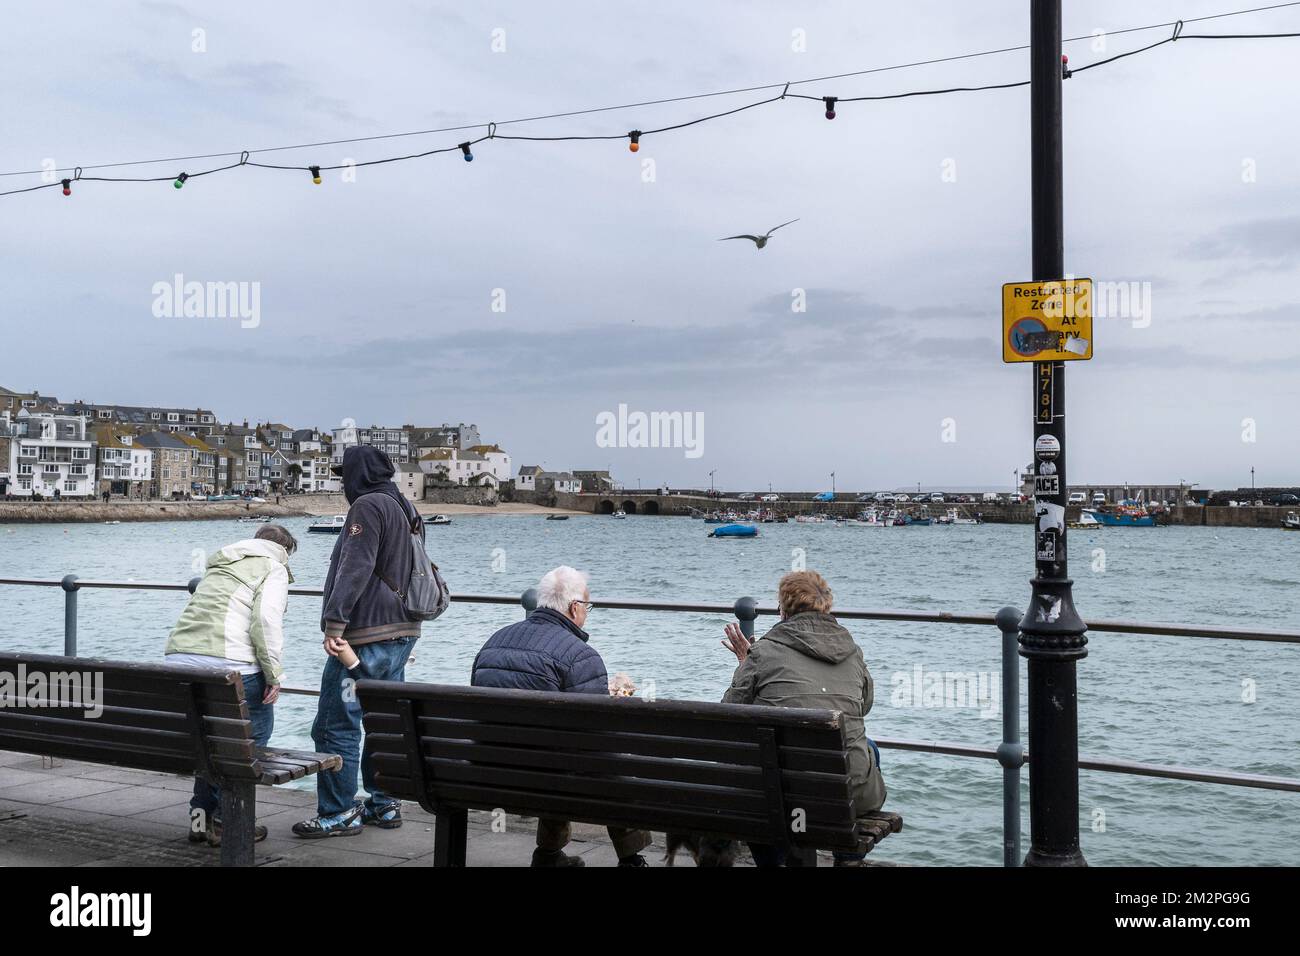 UK weather. Visitors sitting on a bench looking out over the harbour to Smeatons Pier on a rainy chilly miserable day in the historic seaside town of Stock Photo